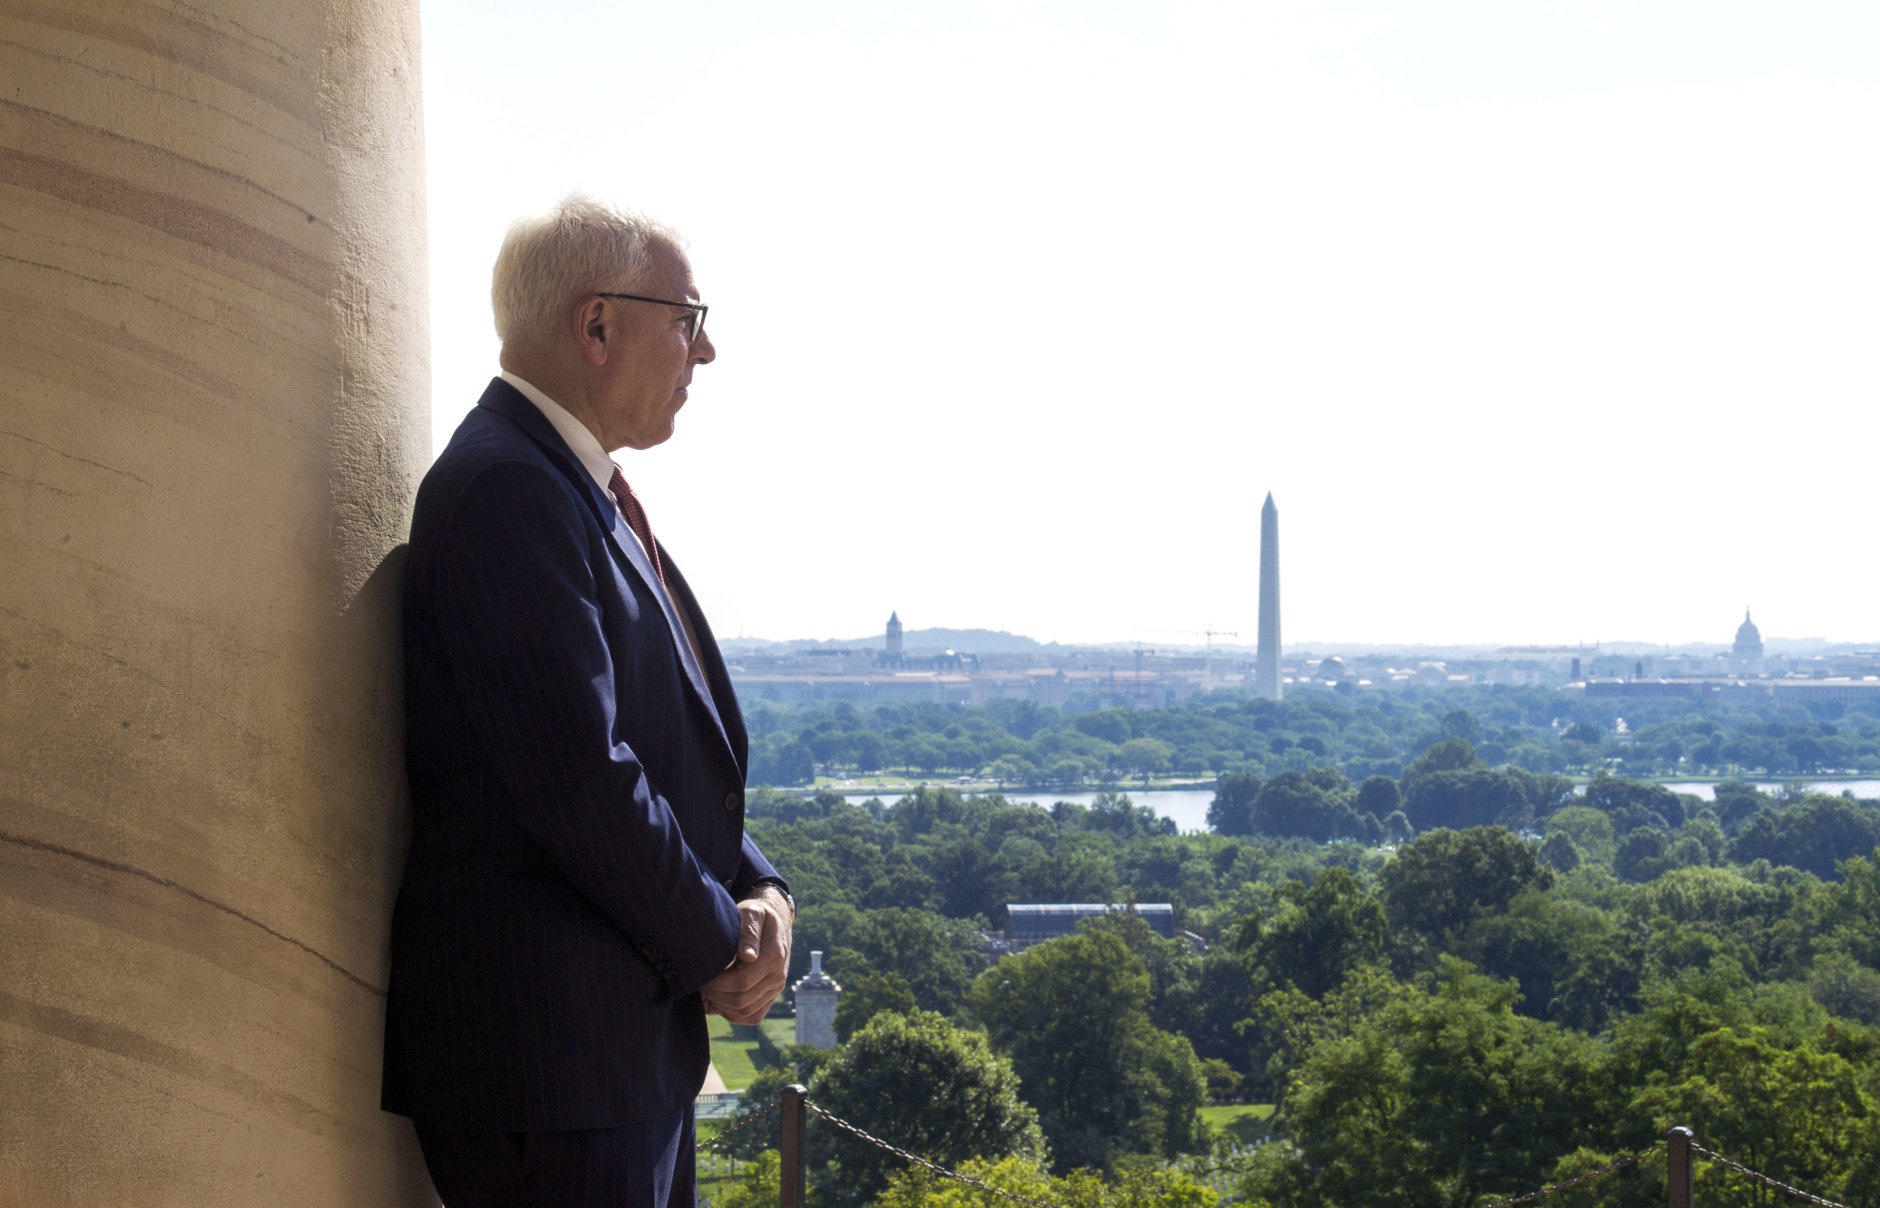 Philanthropist David Rubenstein stands by a portico pillar of the historical Arlington House at Arlington National Cemetery in Arlington, Va., Thursday, July 17, 2014. The historic house and plantation originally built as a monument to George Washington overlooking the nations capital that later was home to Confederate Gen. Robert E. Lee and 63 slaves will be restored to its historical appearance after a $12.3 million gift from Rubenstein. (AP Photo/Cliff Owen))